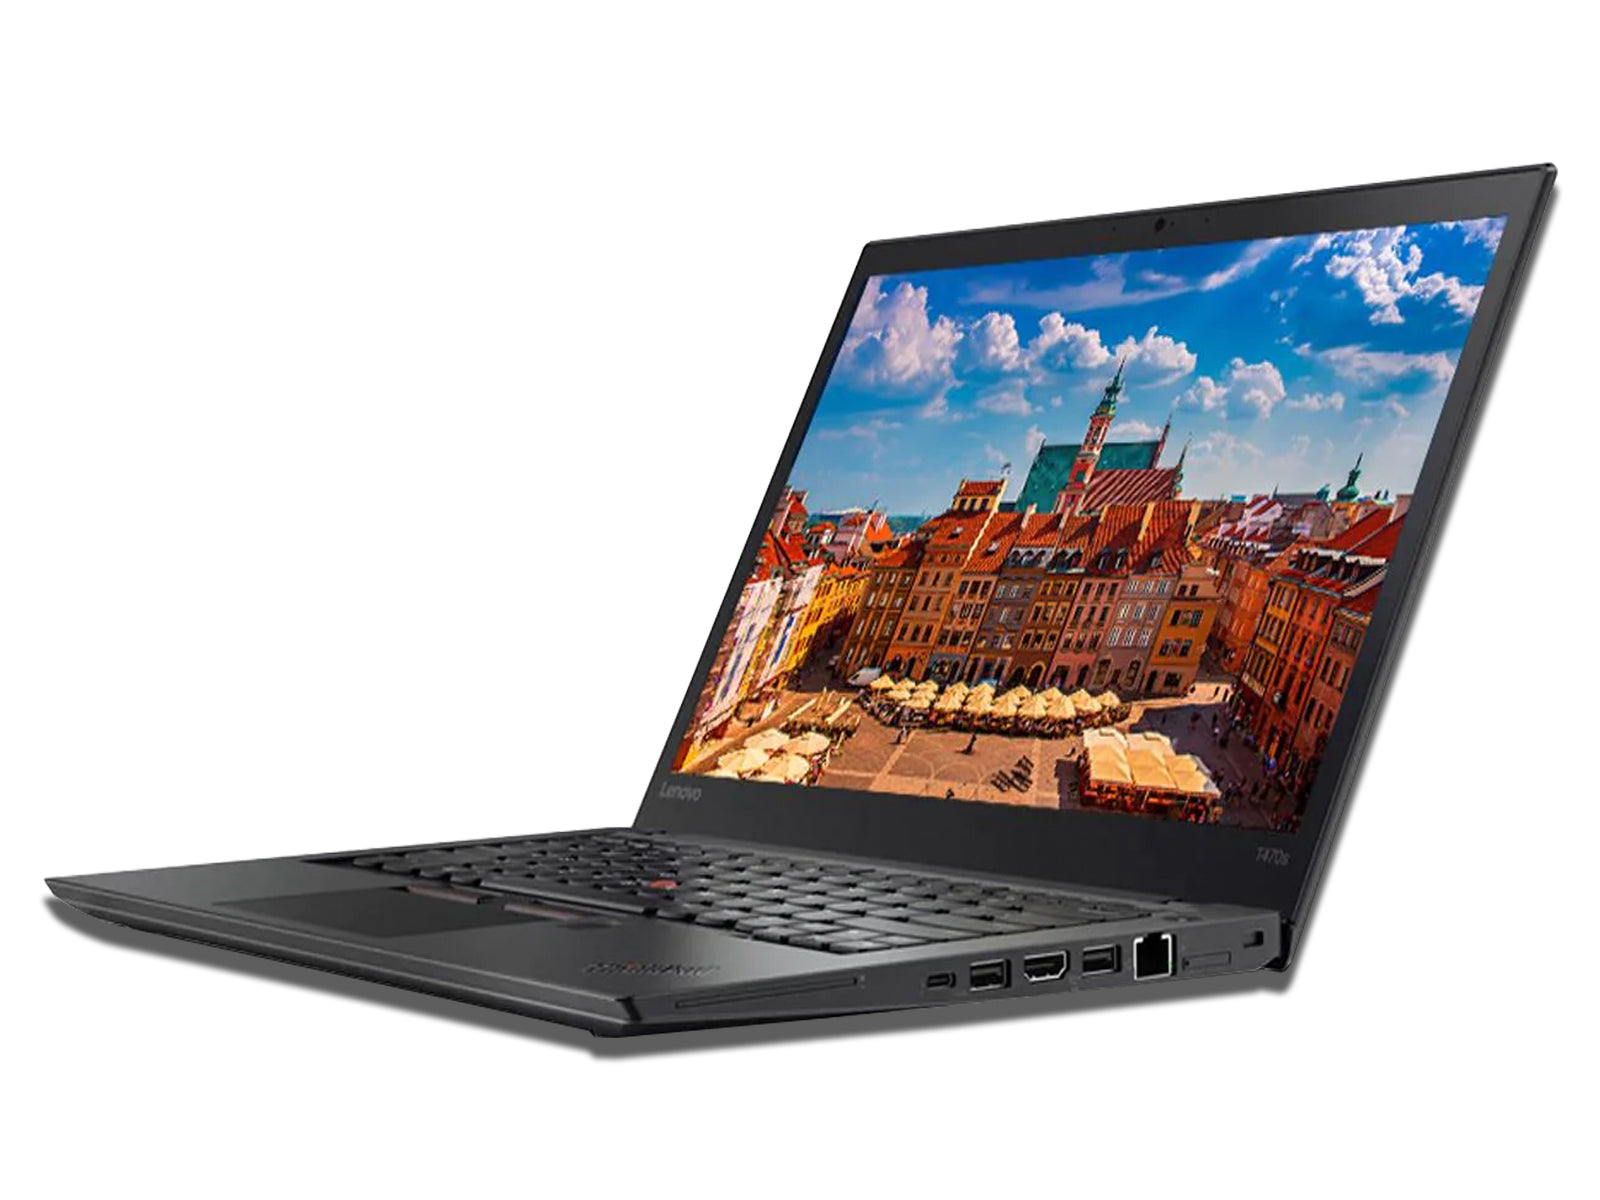 Right Side View Image of The Lenovo T470s Laptop on The White Background